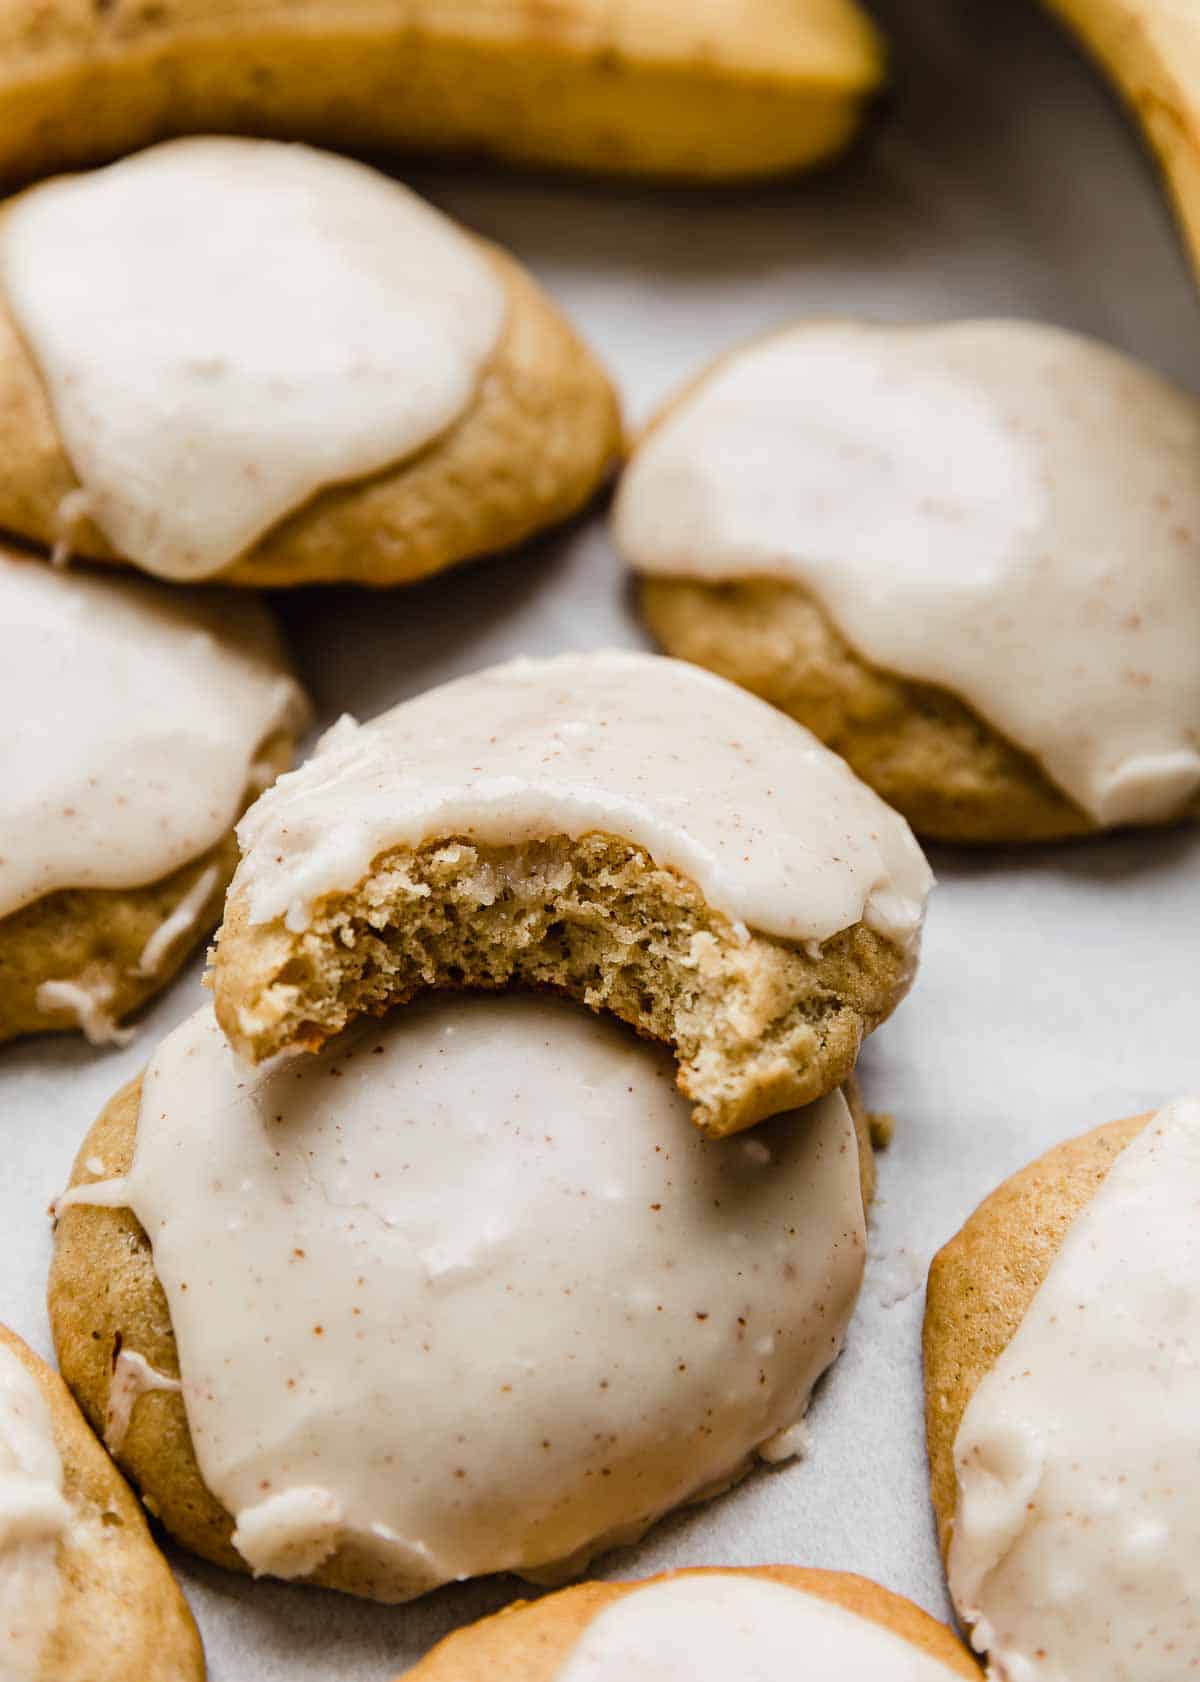 Frosted Banana Cookies with one cookie having a bite taken out of it.